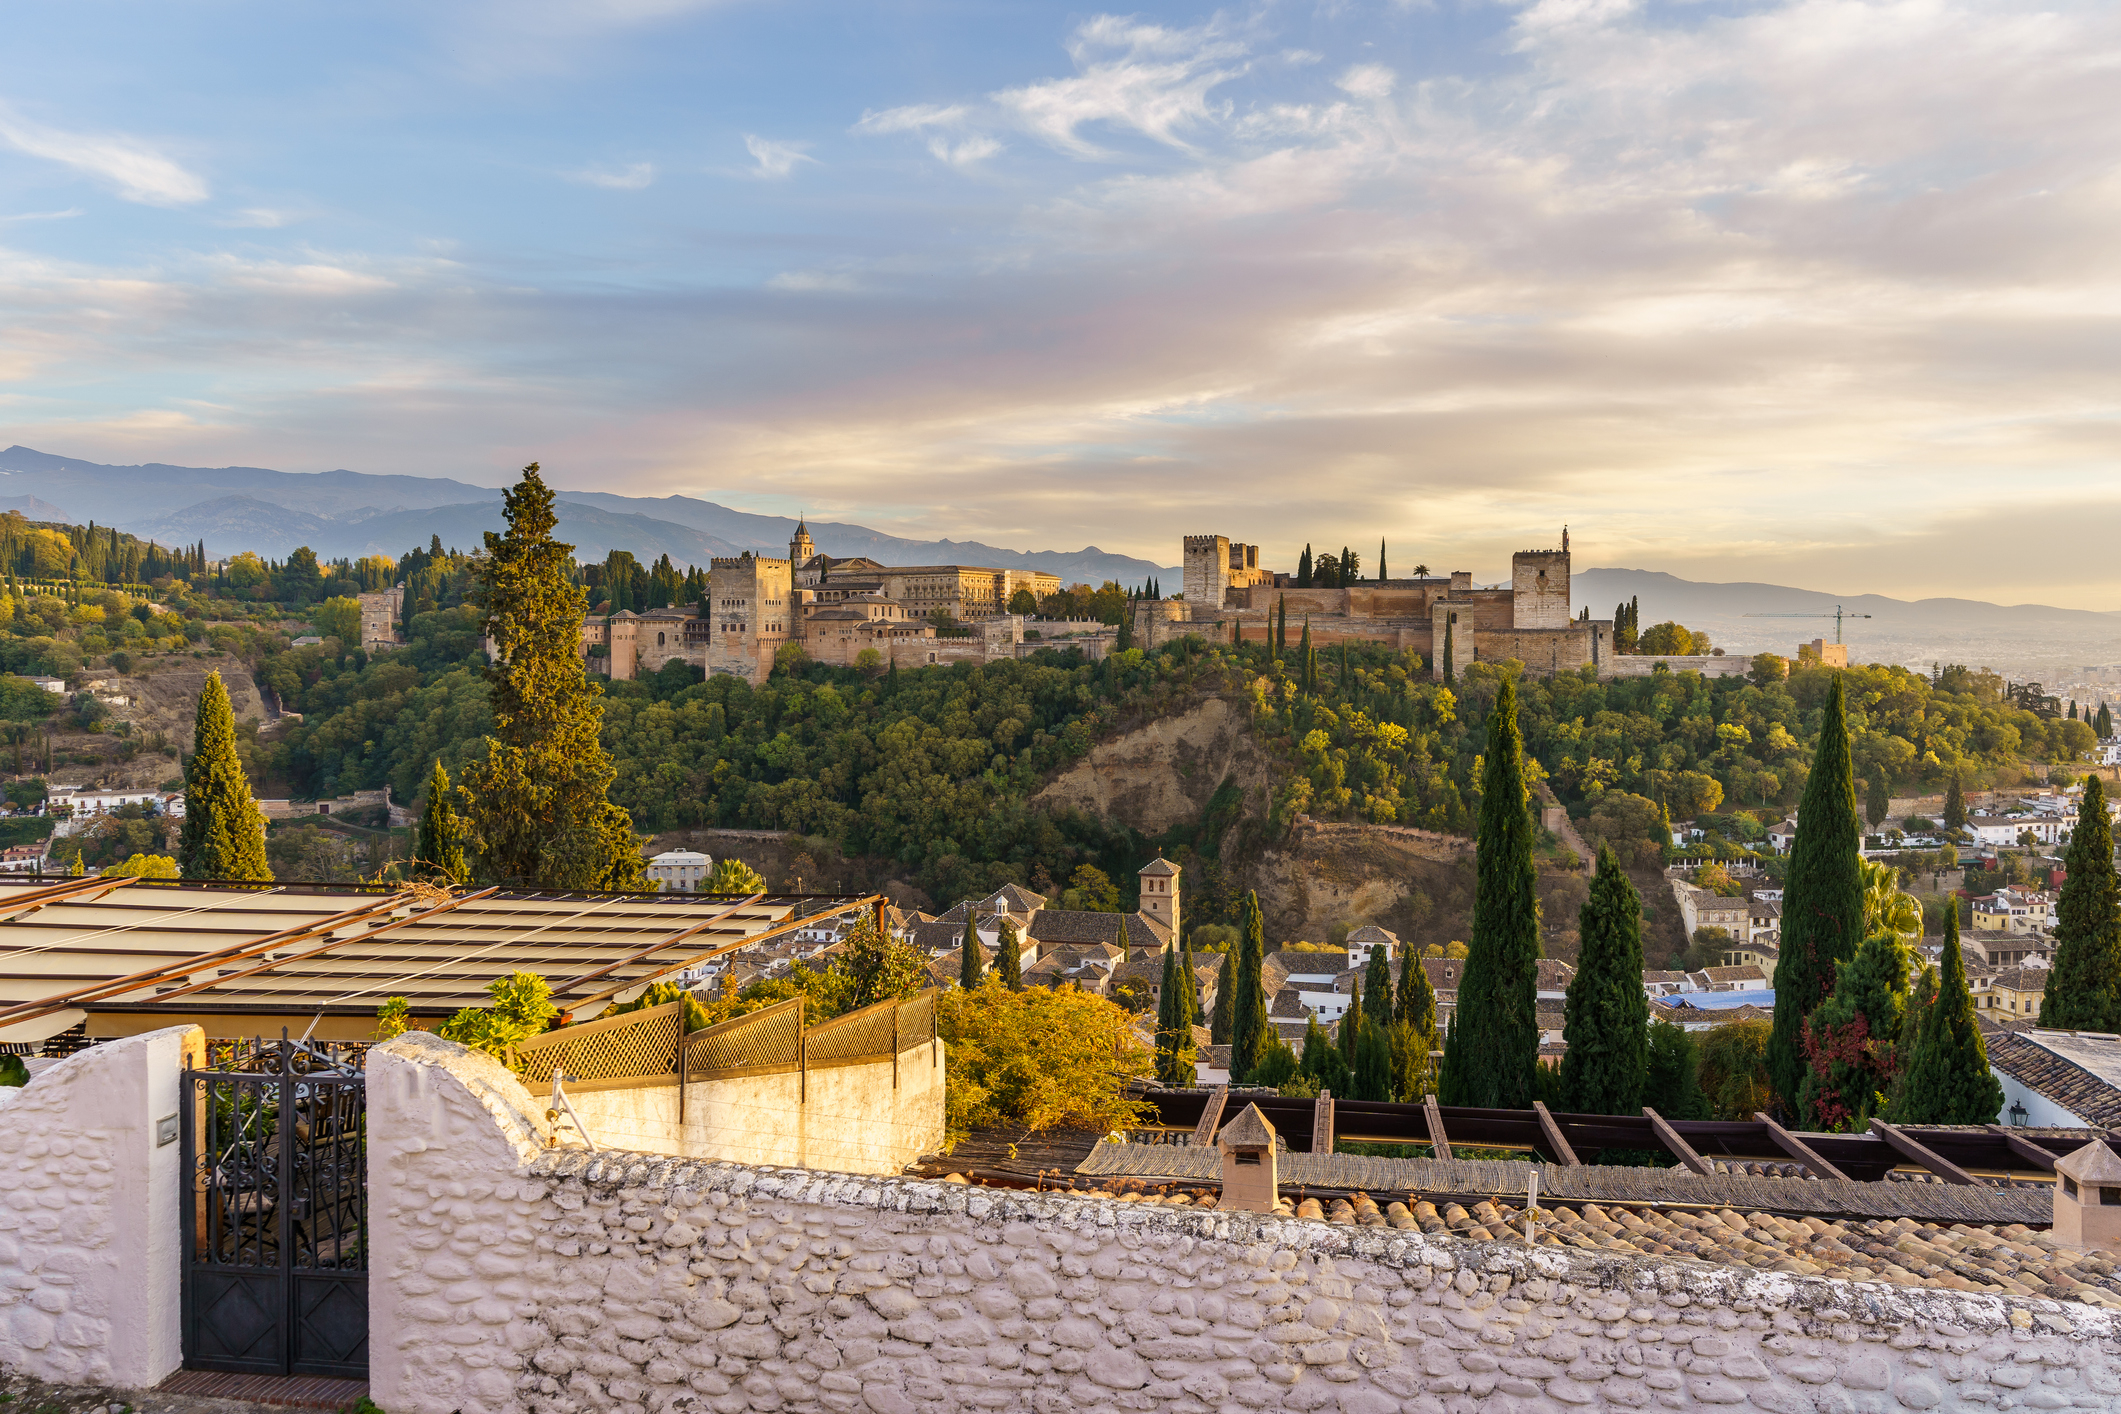 View of Alhambra palace during sunset with trees surrounding the structure